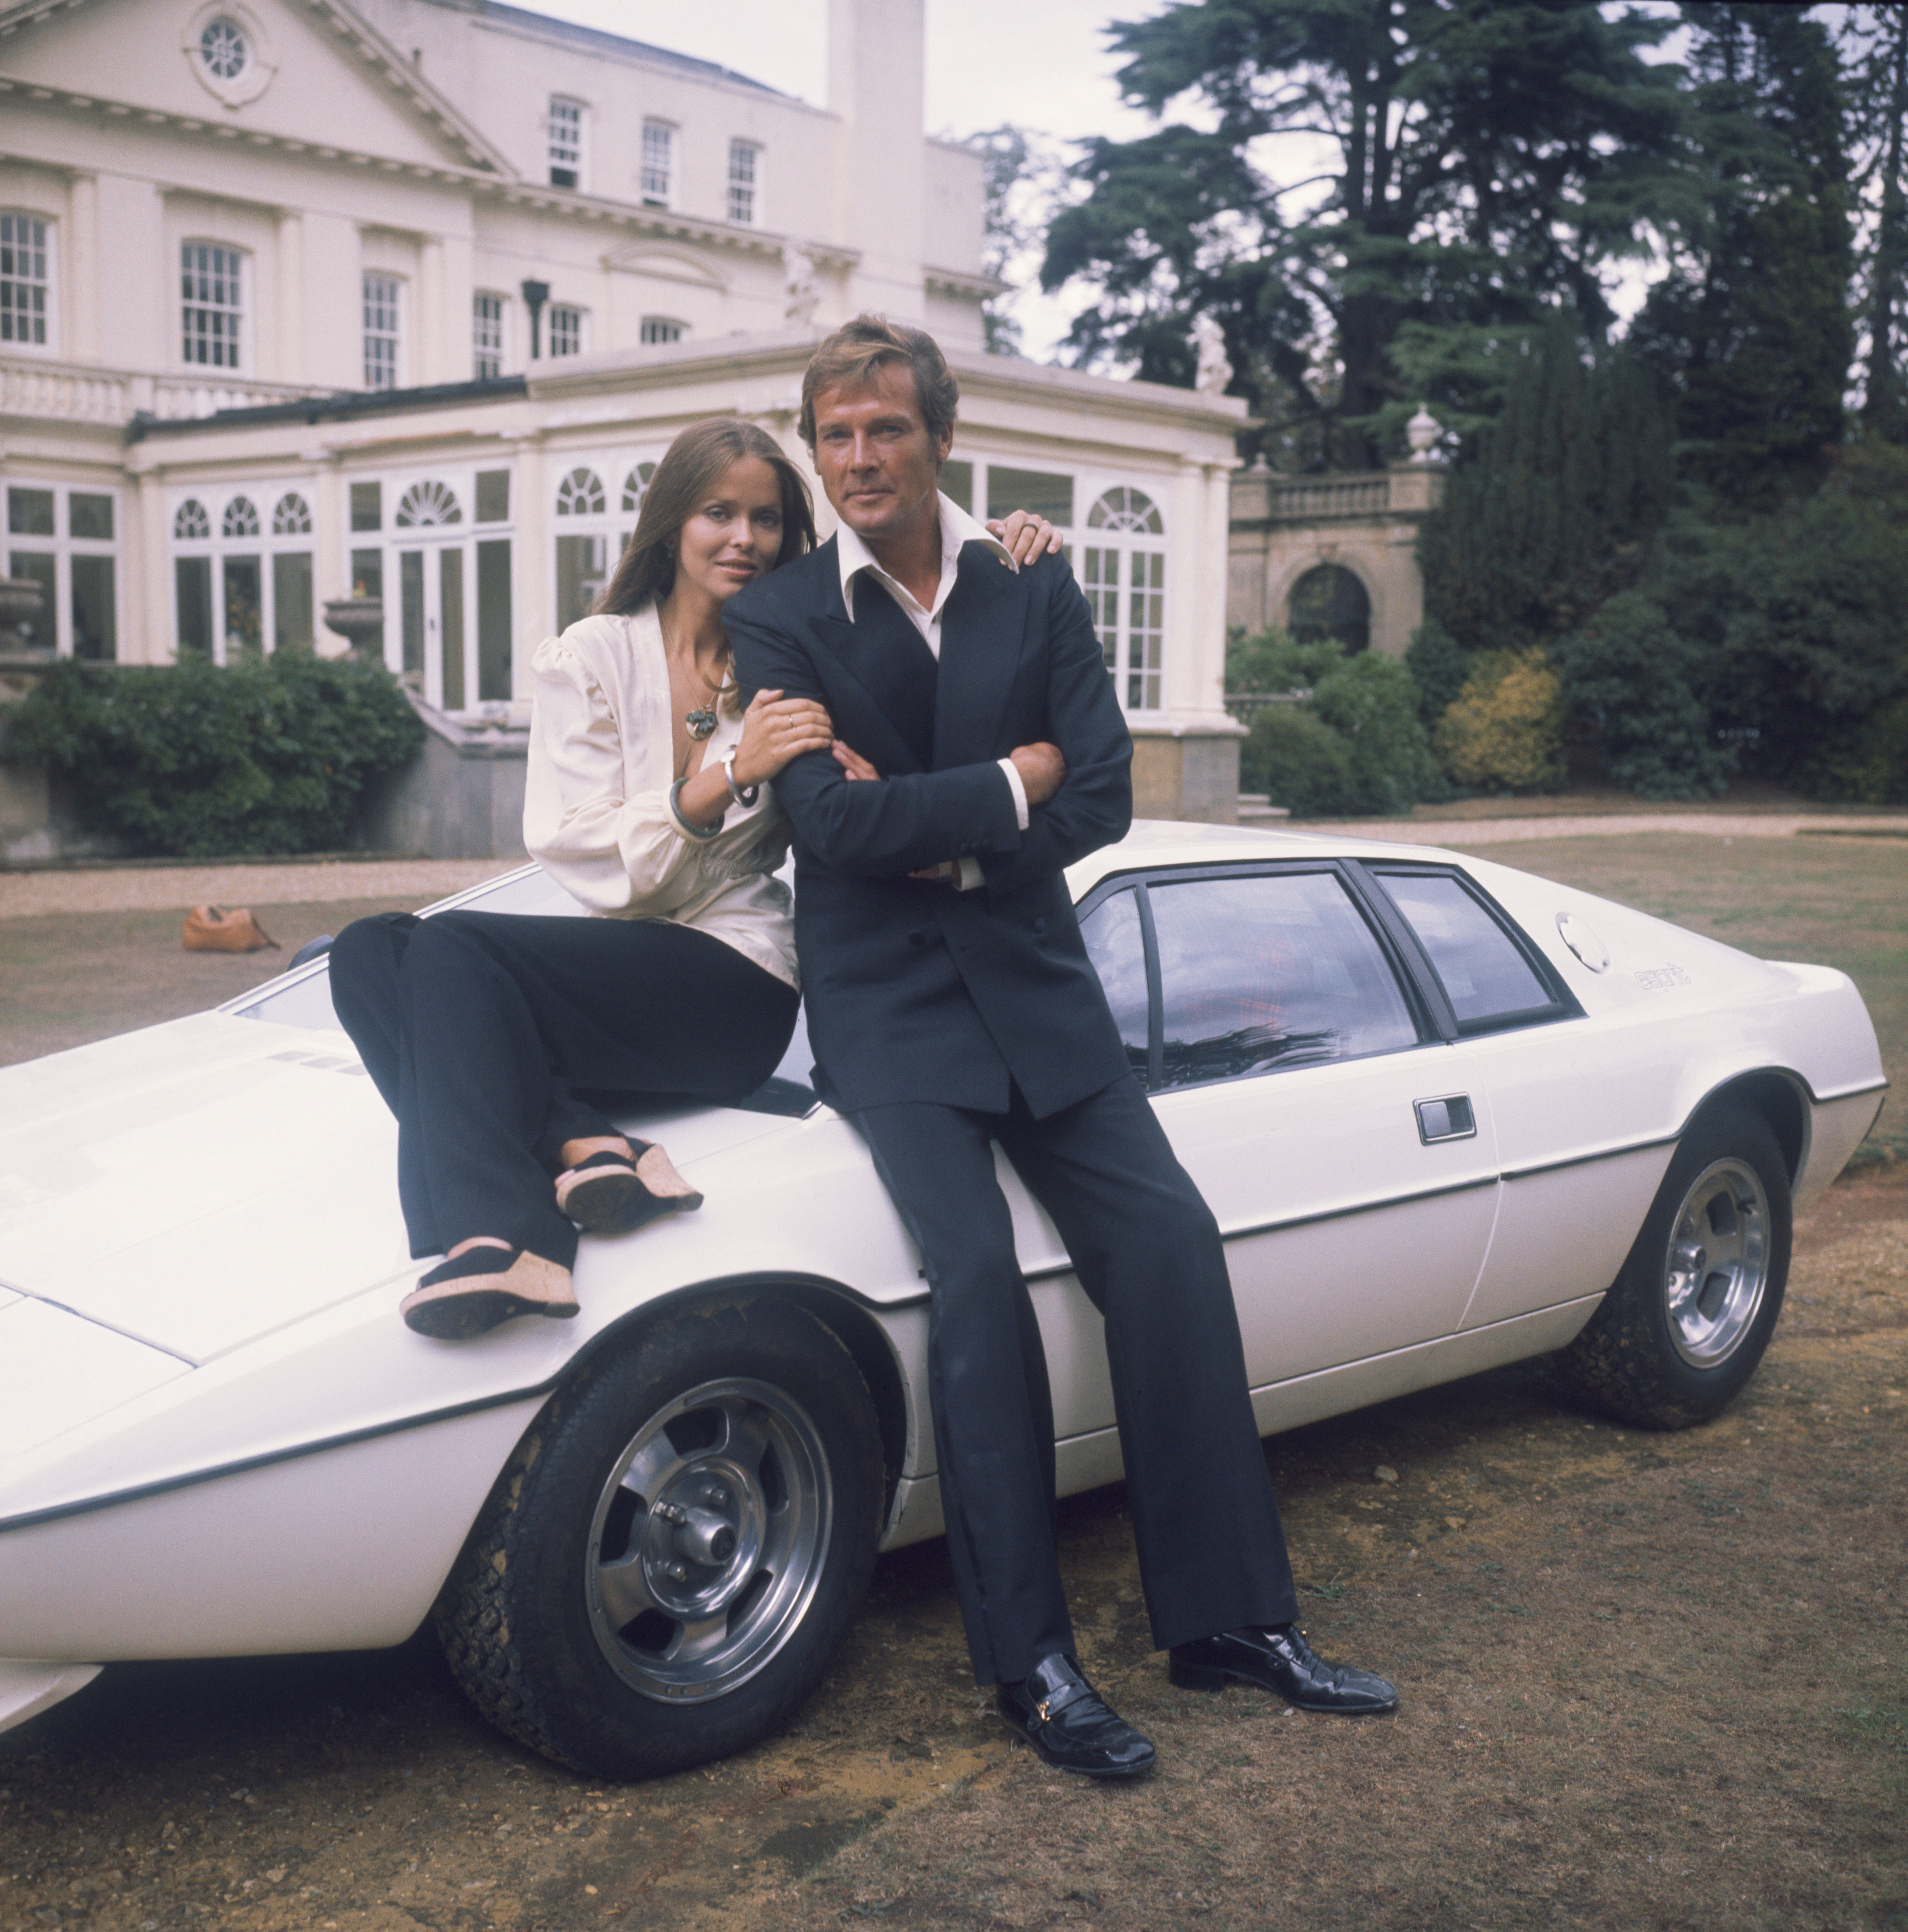 1977:  Barbara Bach and Roger Moore, stars of the James Bond film &apos;The Spy Who Loved Me&apos; leaning on the now-famous &apos;amphibious&apos; Lotus Esprit.  (Photo by Hulton Archive/Getty Images)